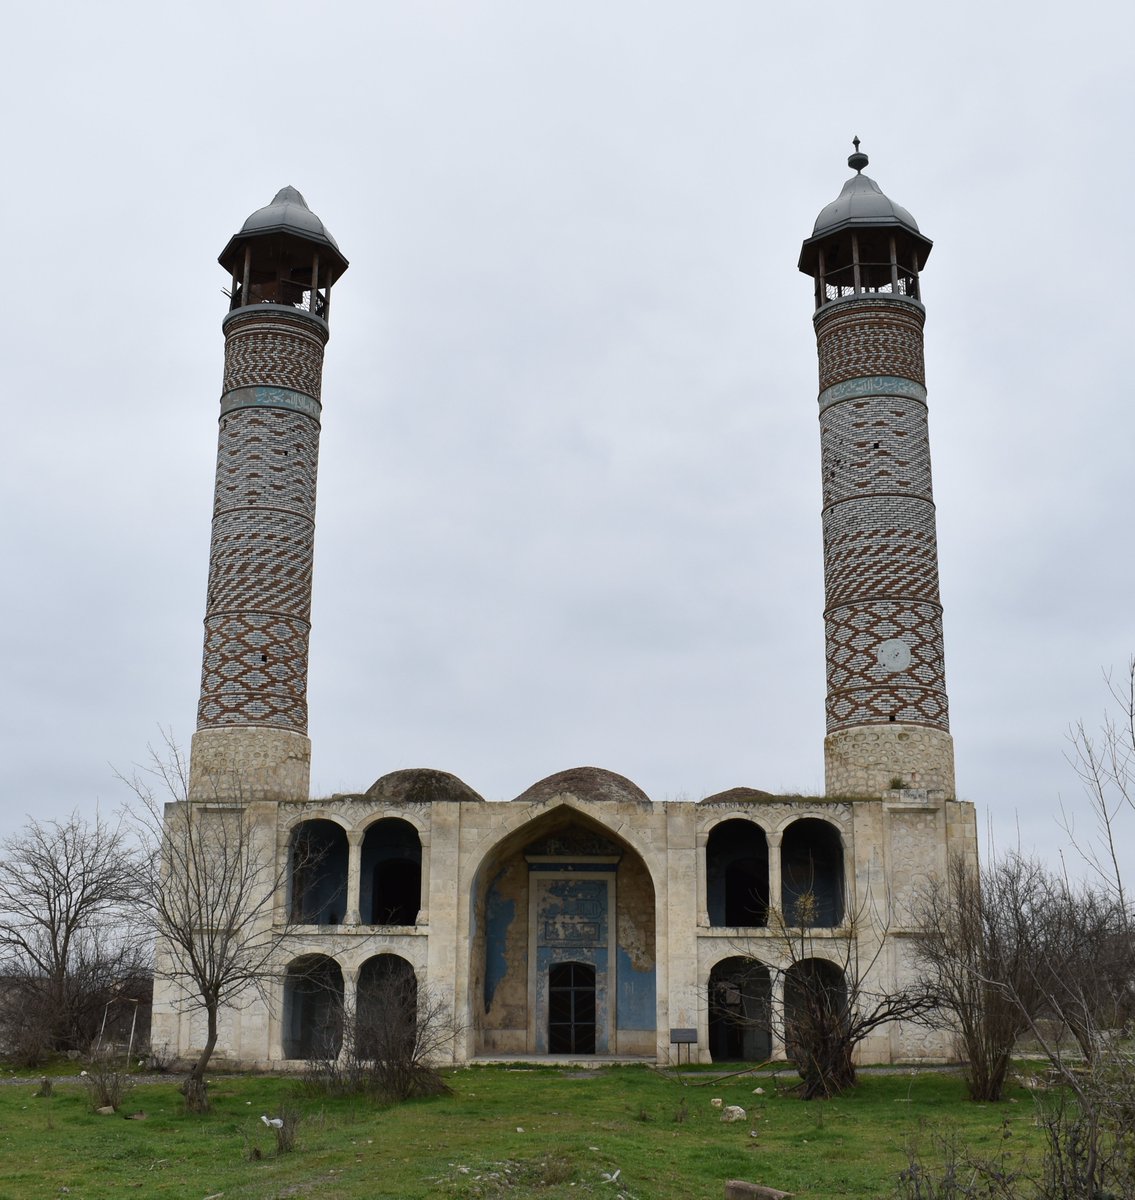 Thread:List of important landmarks in Azerbaijan's occupied areas.Agdam MosqueThe mosque was built by the architect Karbalayi Safikhan Karabakhi from 1868 to 1870. It was one of the few buildings of the town that was not destroyed during the Nagorno-Karabakh War.